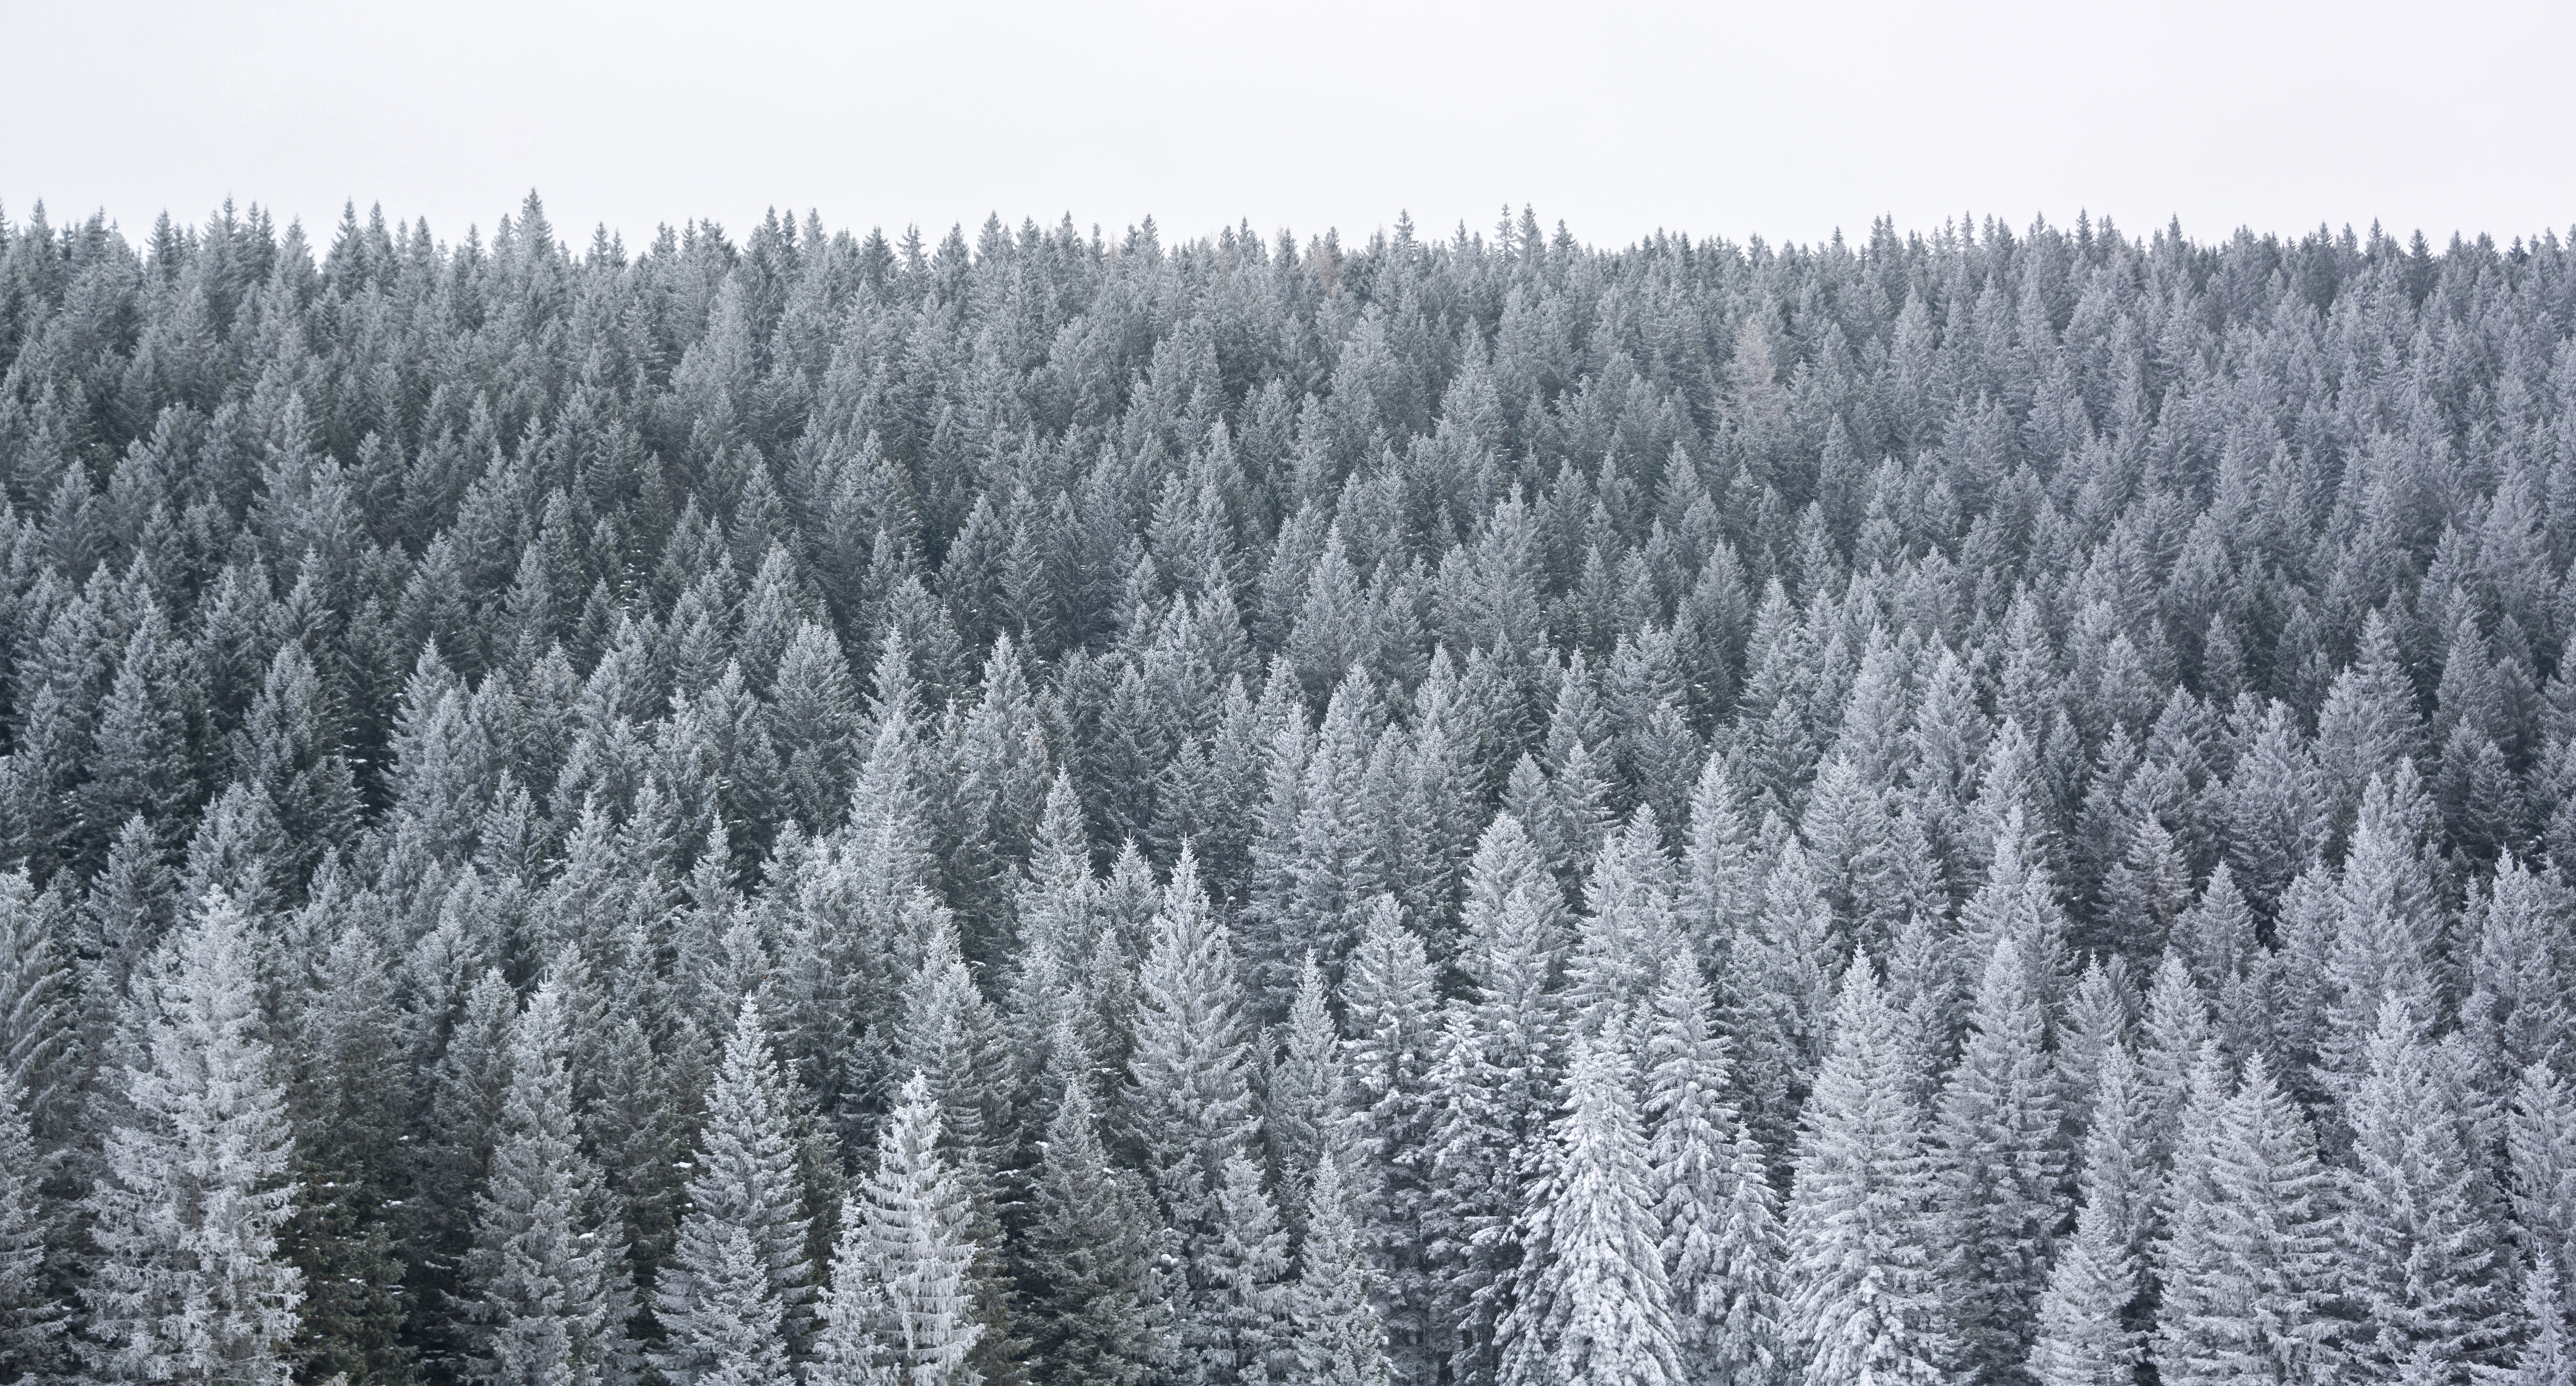 File:Pine trees covered in snow.jpg - Wikimedia Commons